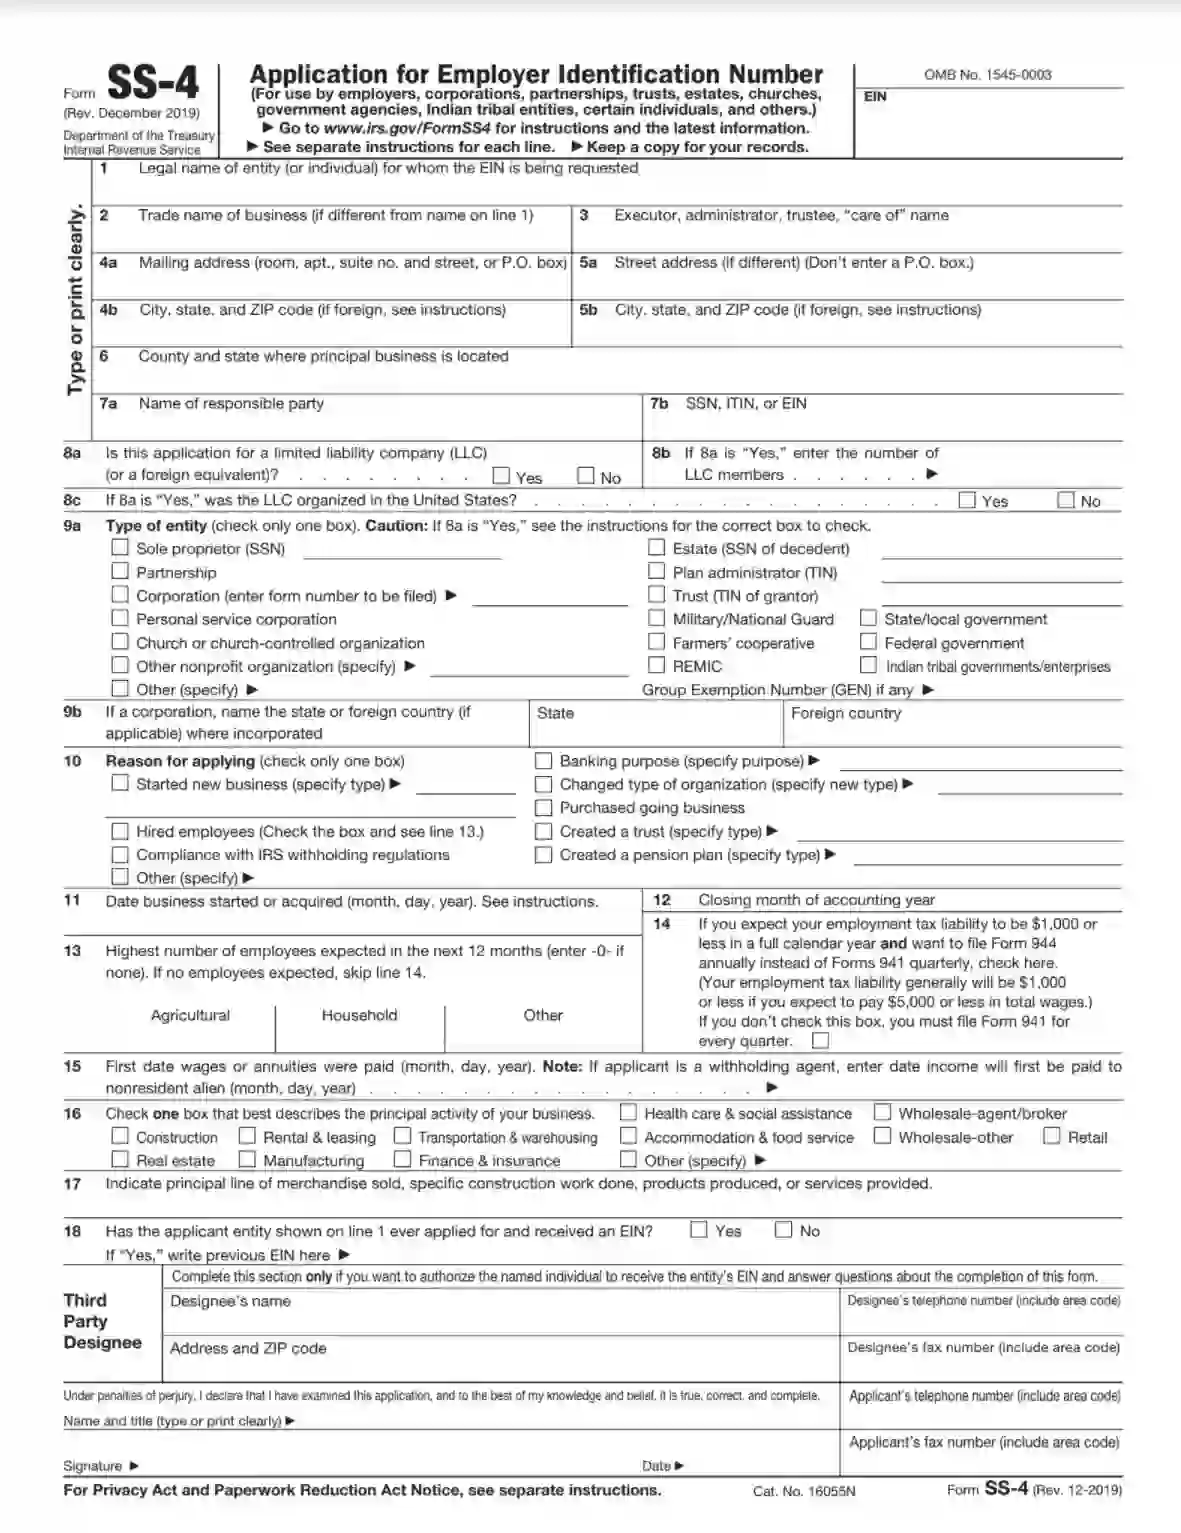 irs form ss-4